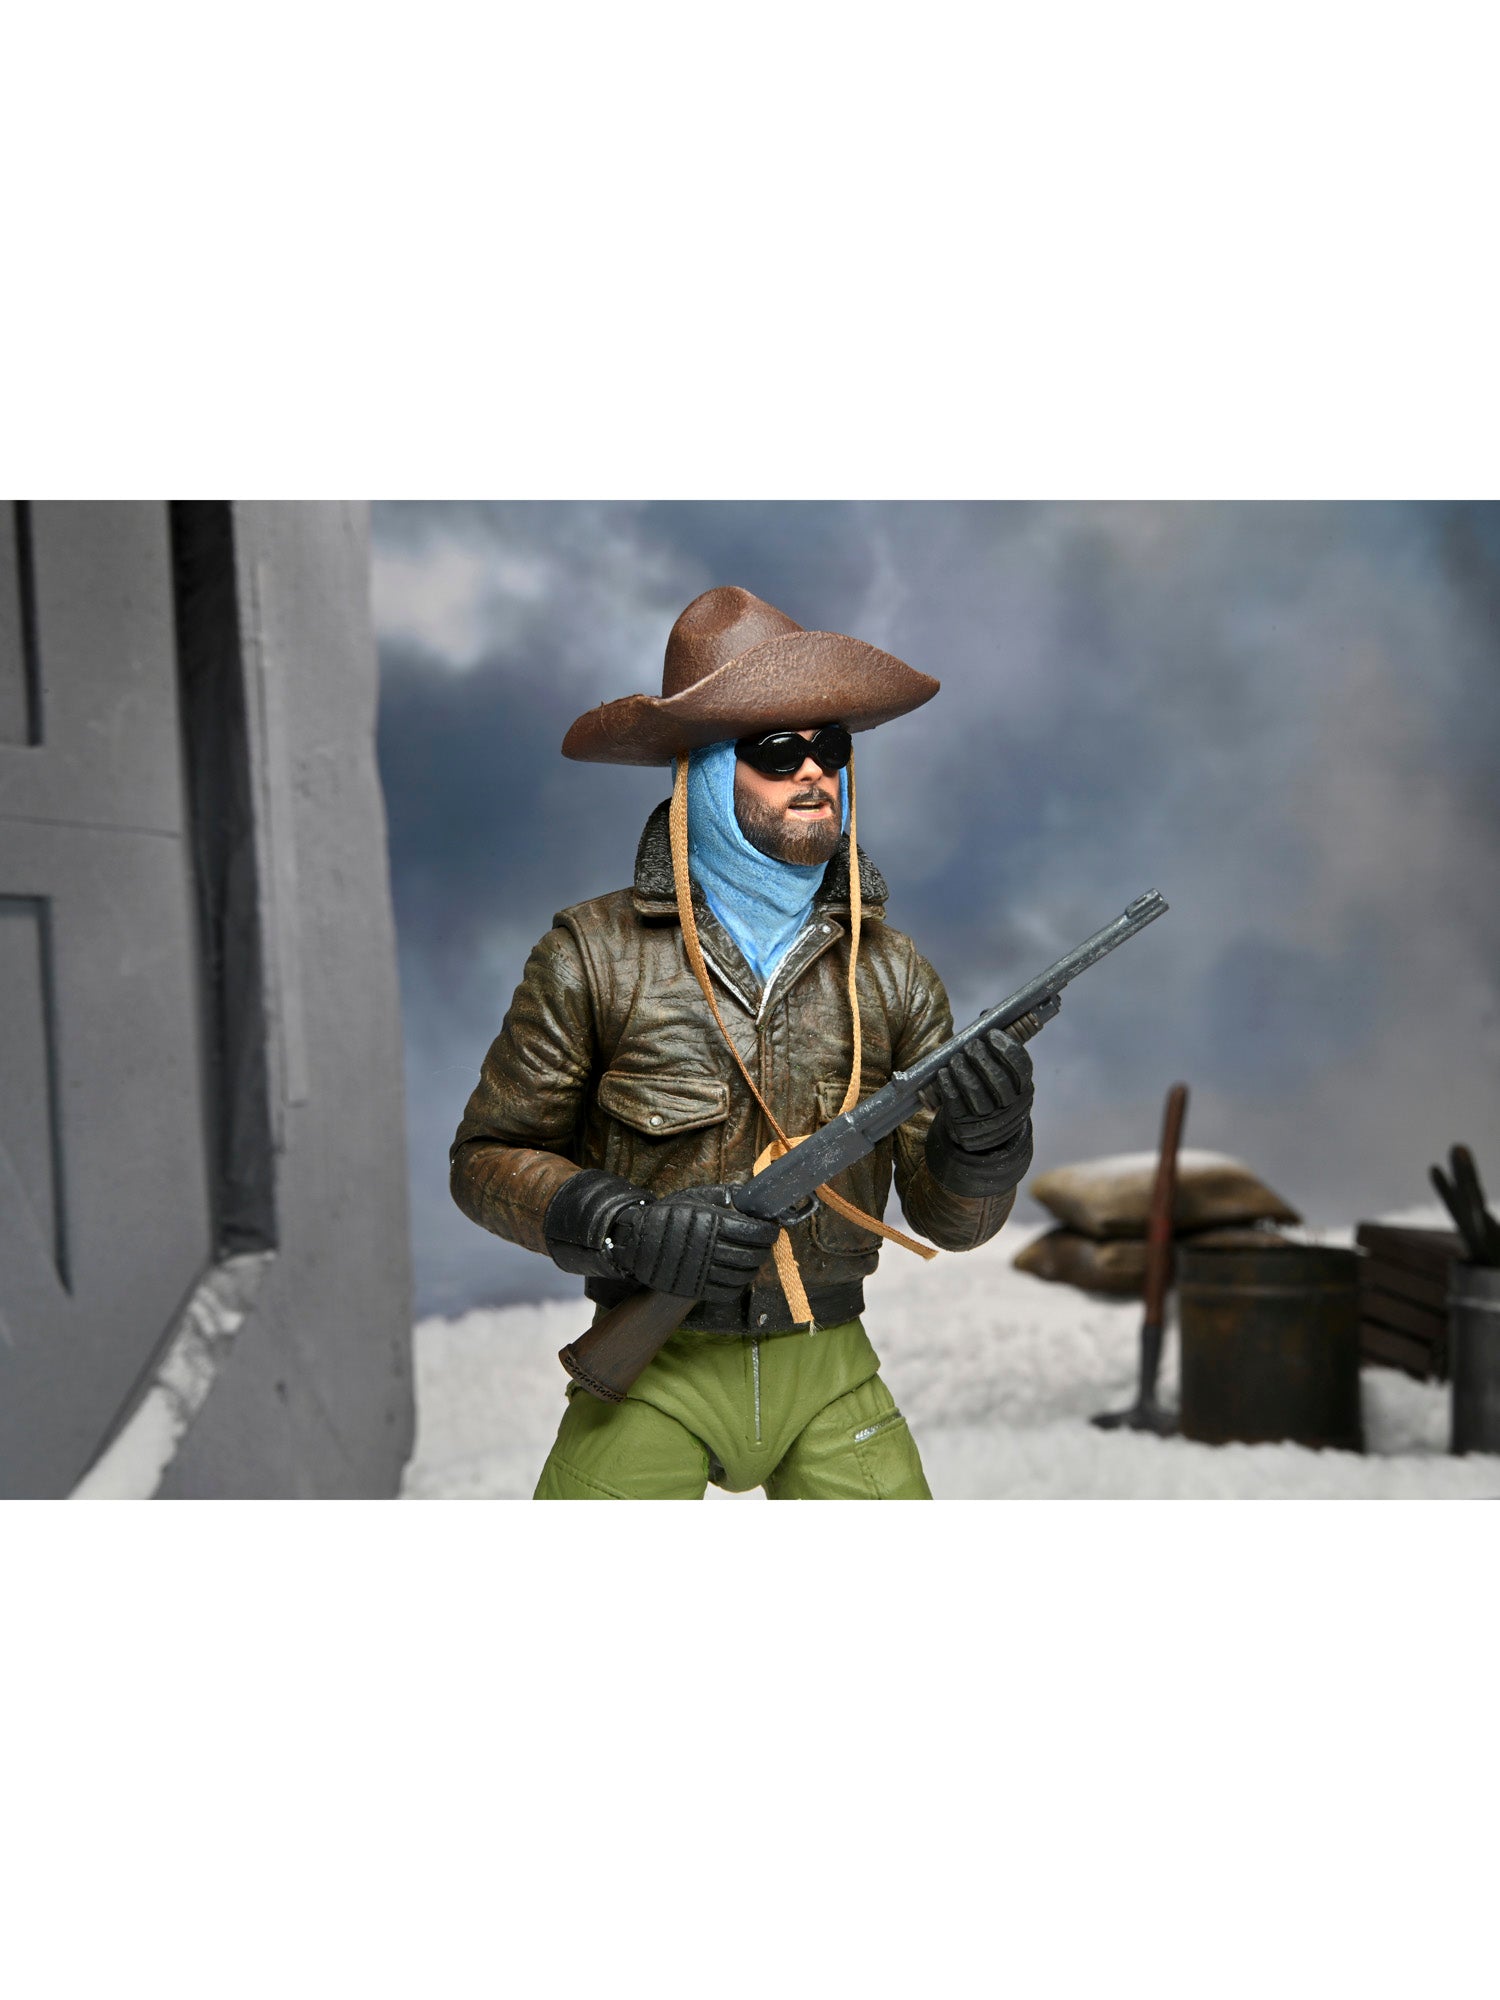 NECA - The Thing - 7" Scale Action Figure - Ultimate Macready (Outpost 31) - costumes.com